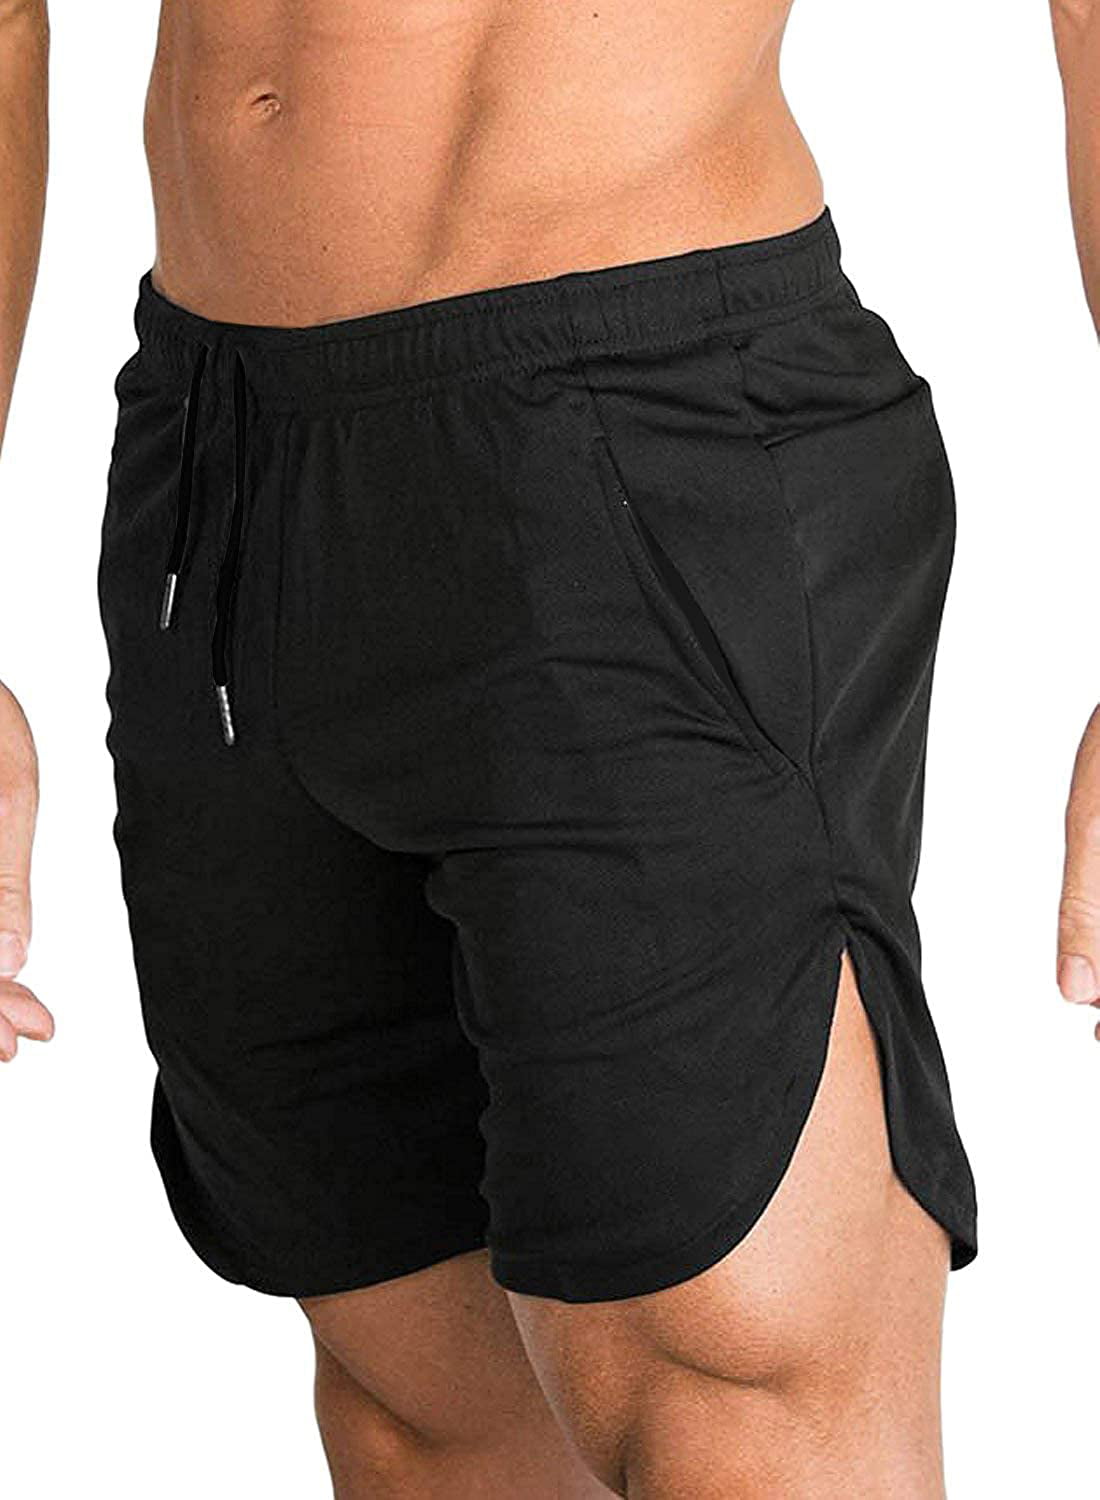 COOFANDY Men's Gym Workout Shorts Running Short Pants Fitted Training Weightlifting Bodybuilding Jogger with Pockets 